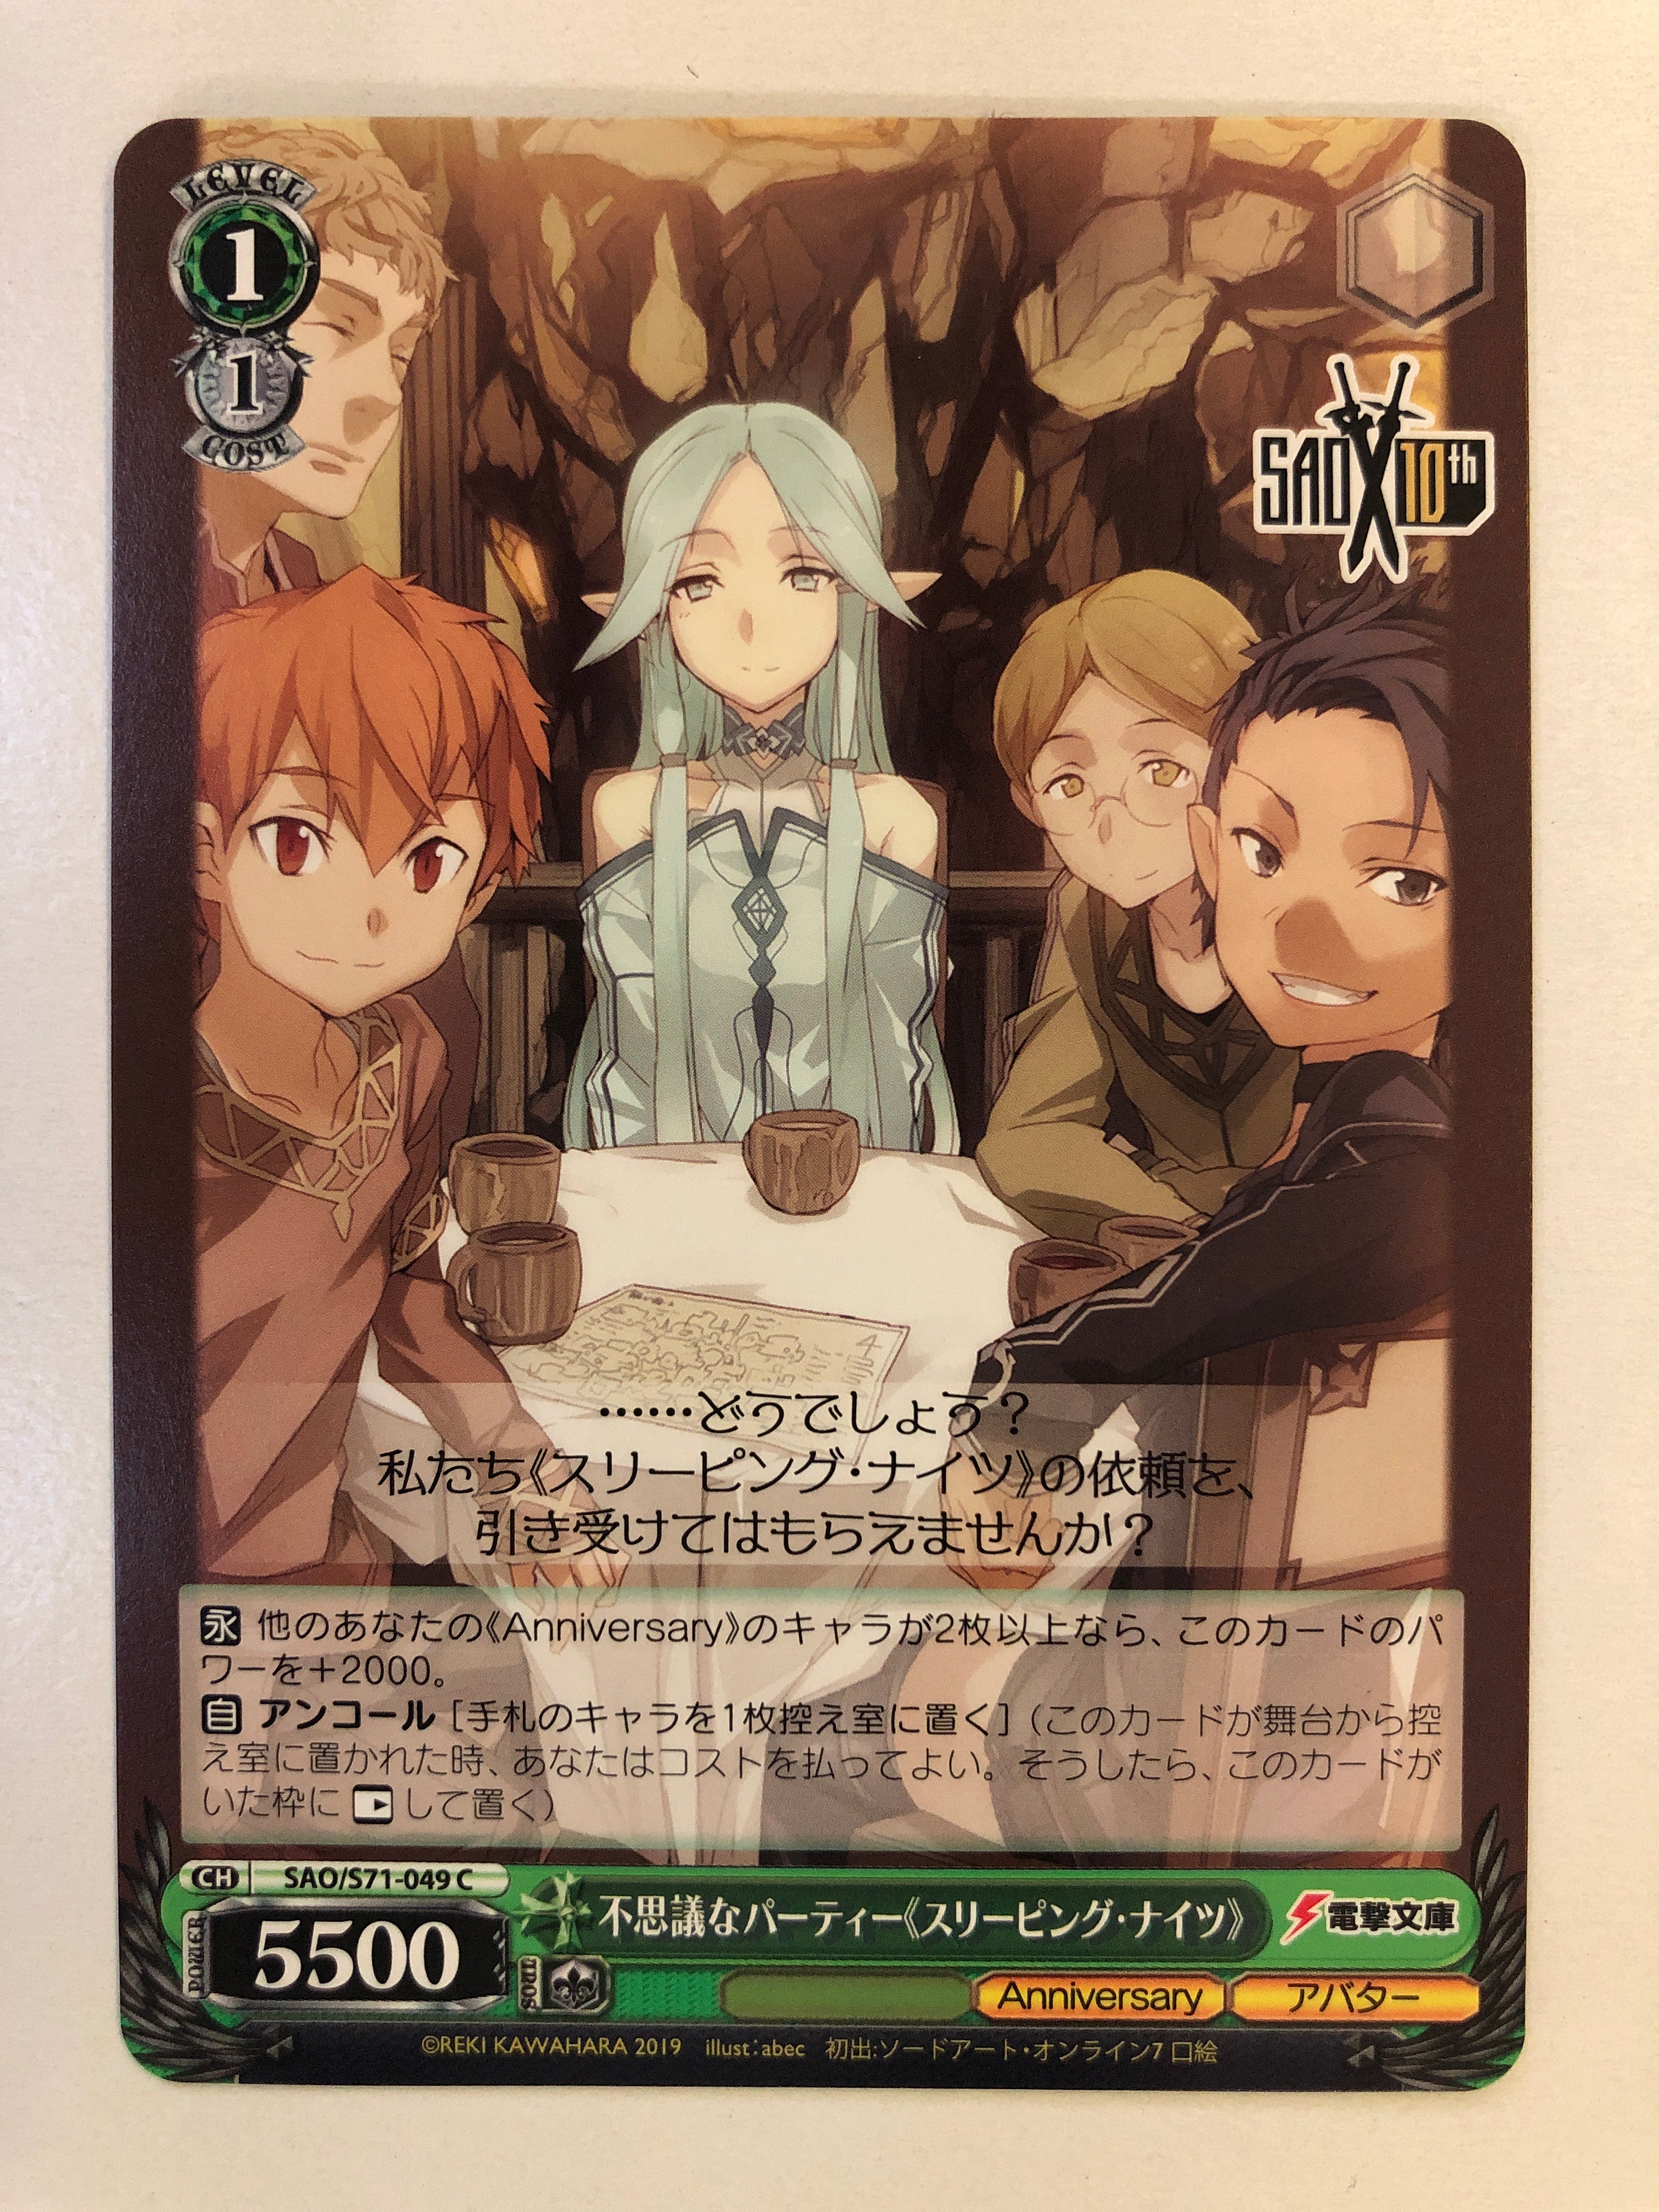 Sleeping Knights, Mysterious Party - SAO/S71-049 C (M/NM)